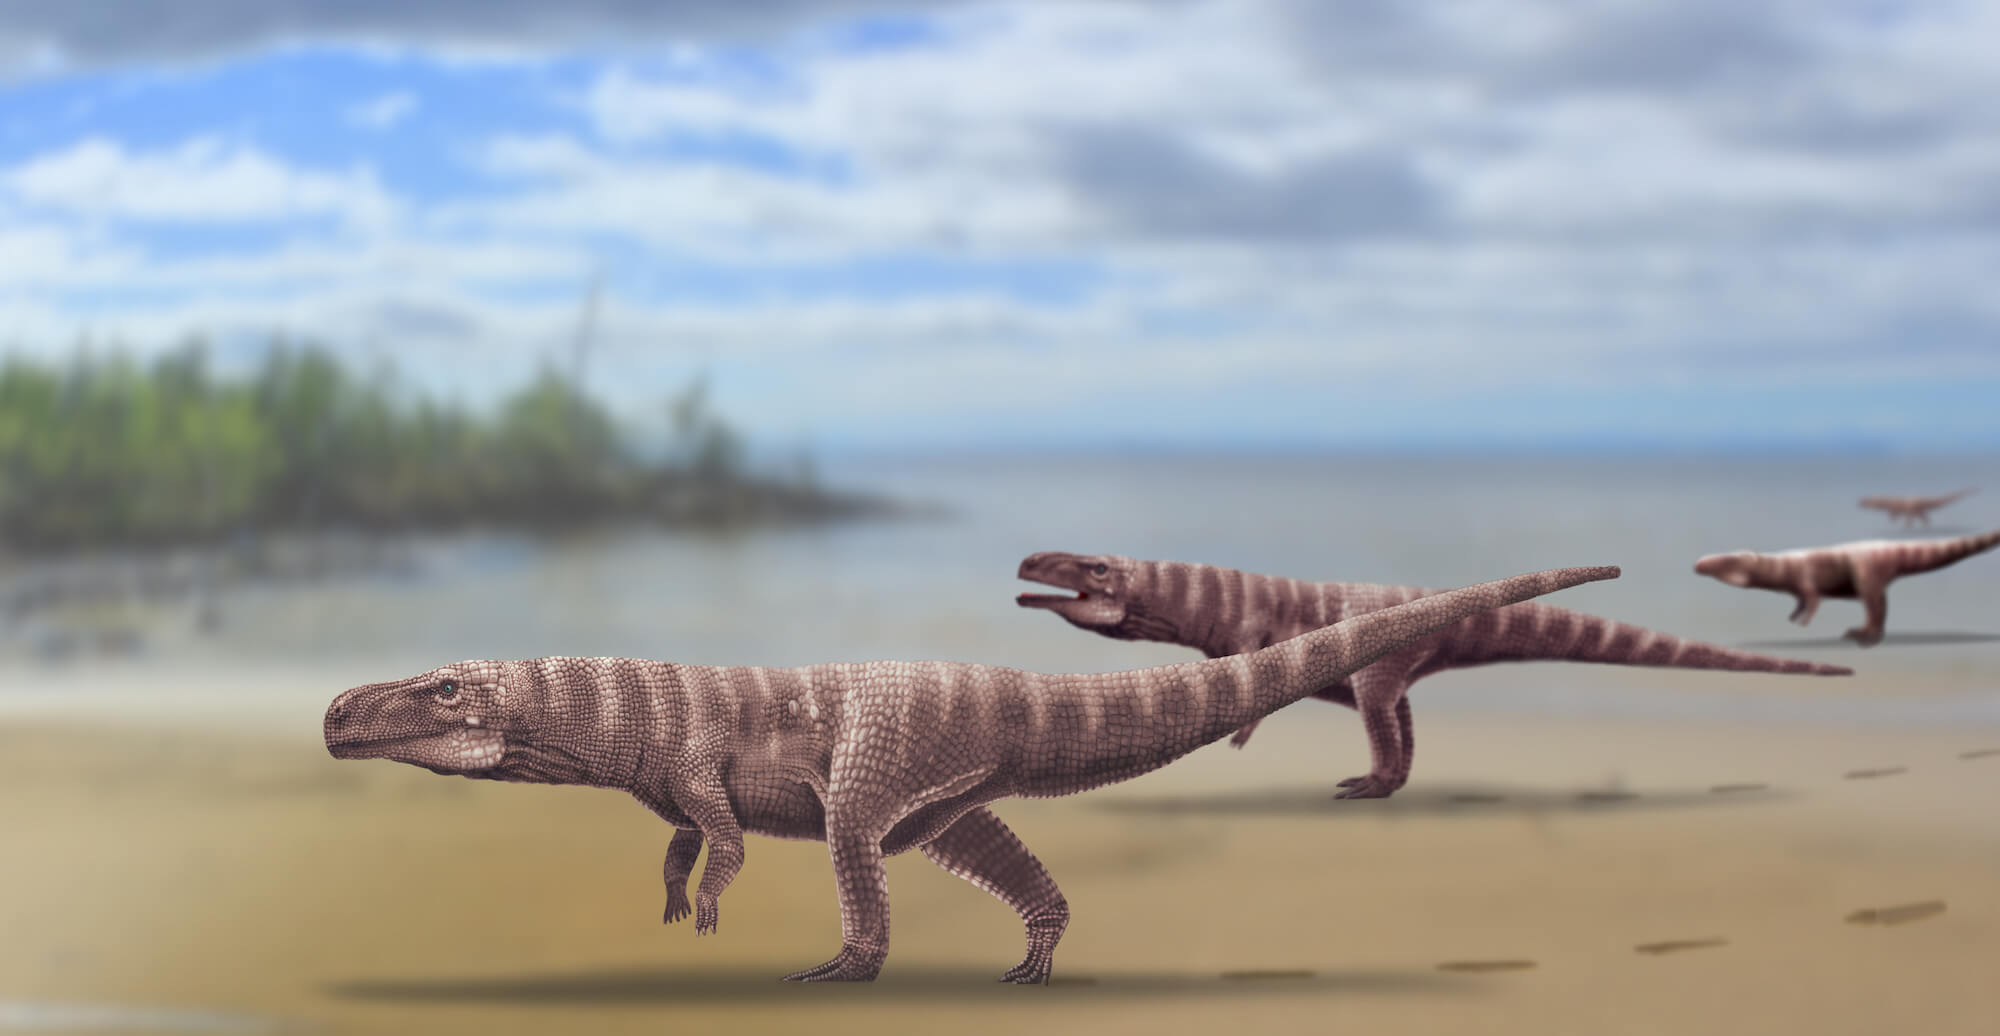 Millions of years ago the ancestors of the crocodiles walked on two legs